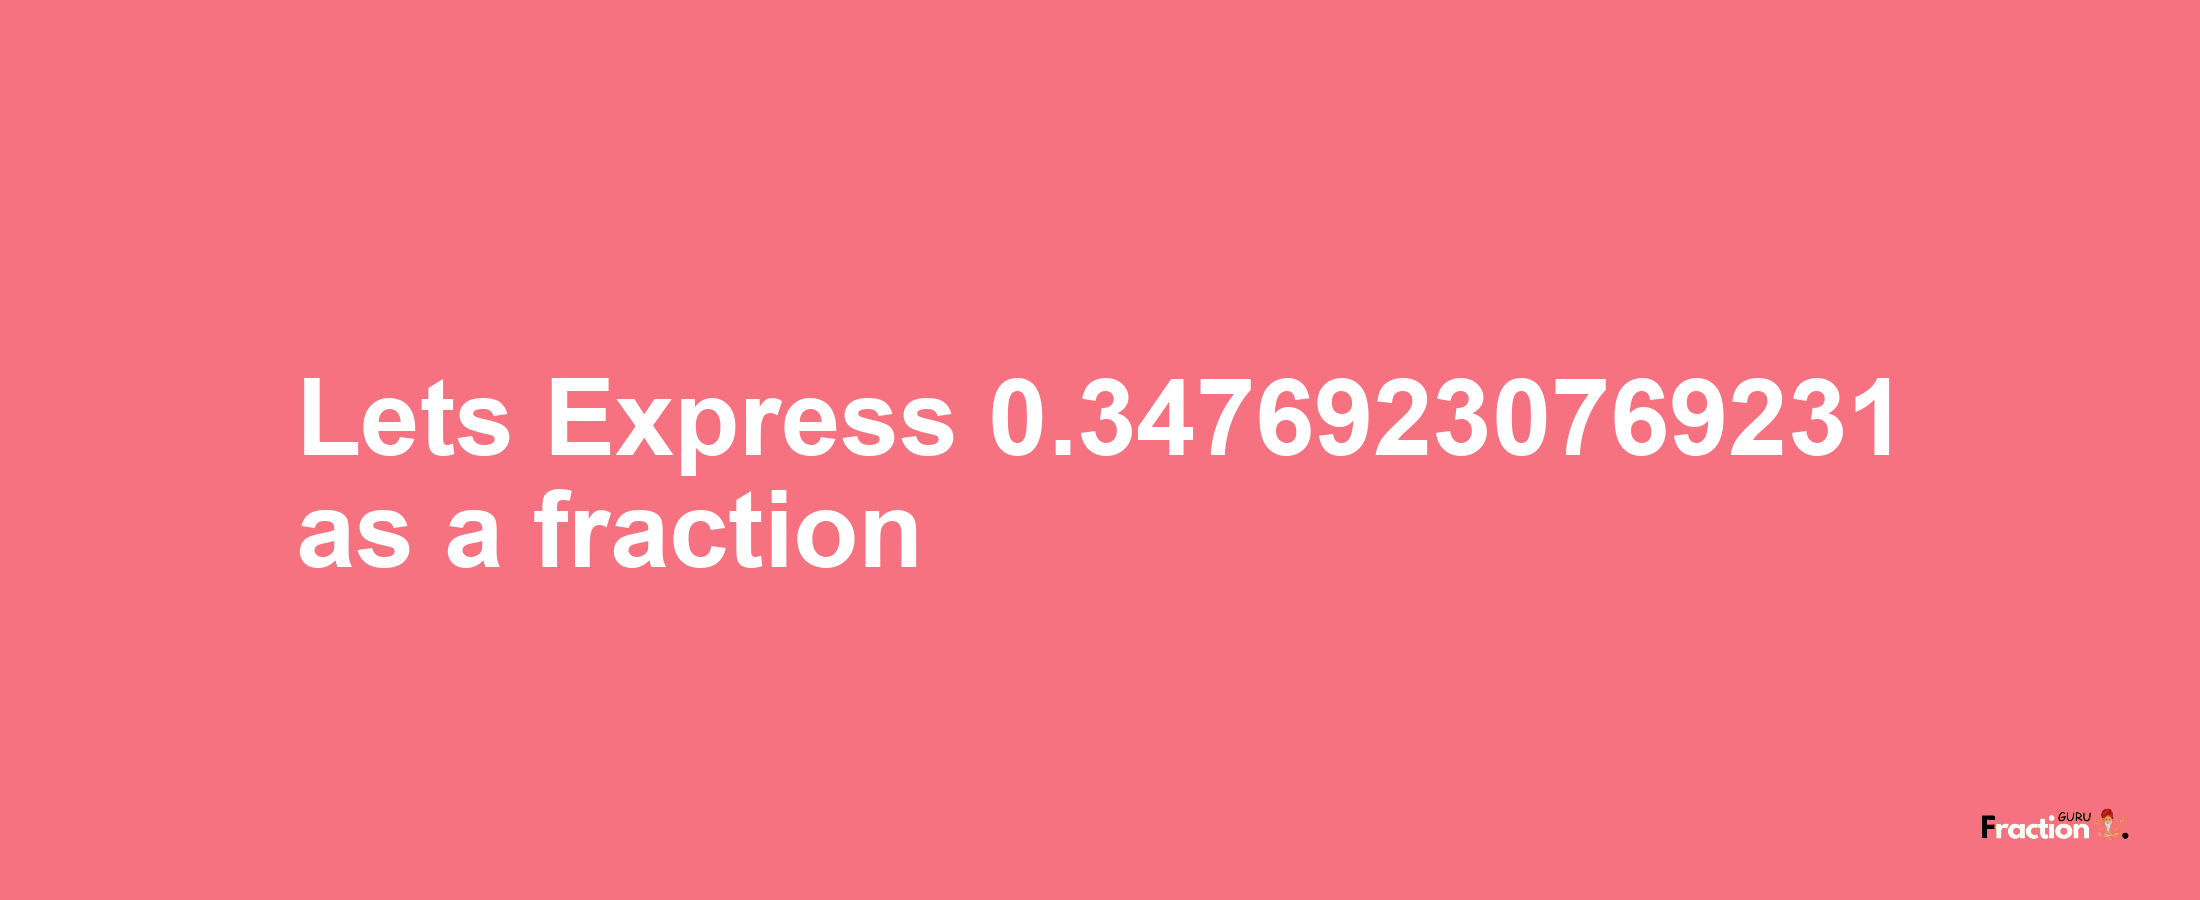 Lets Express 0.34769230769231 as afraction